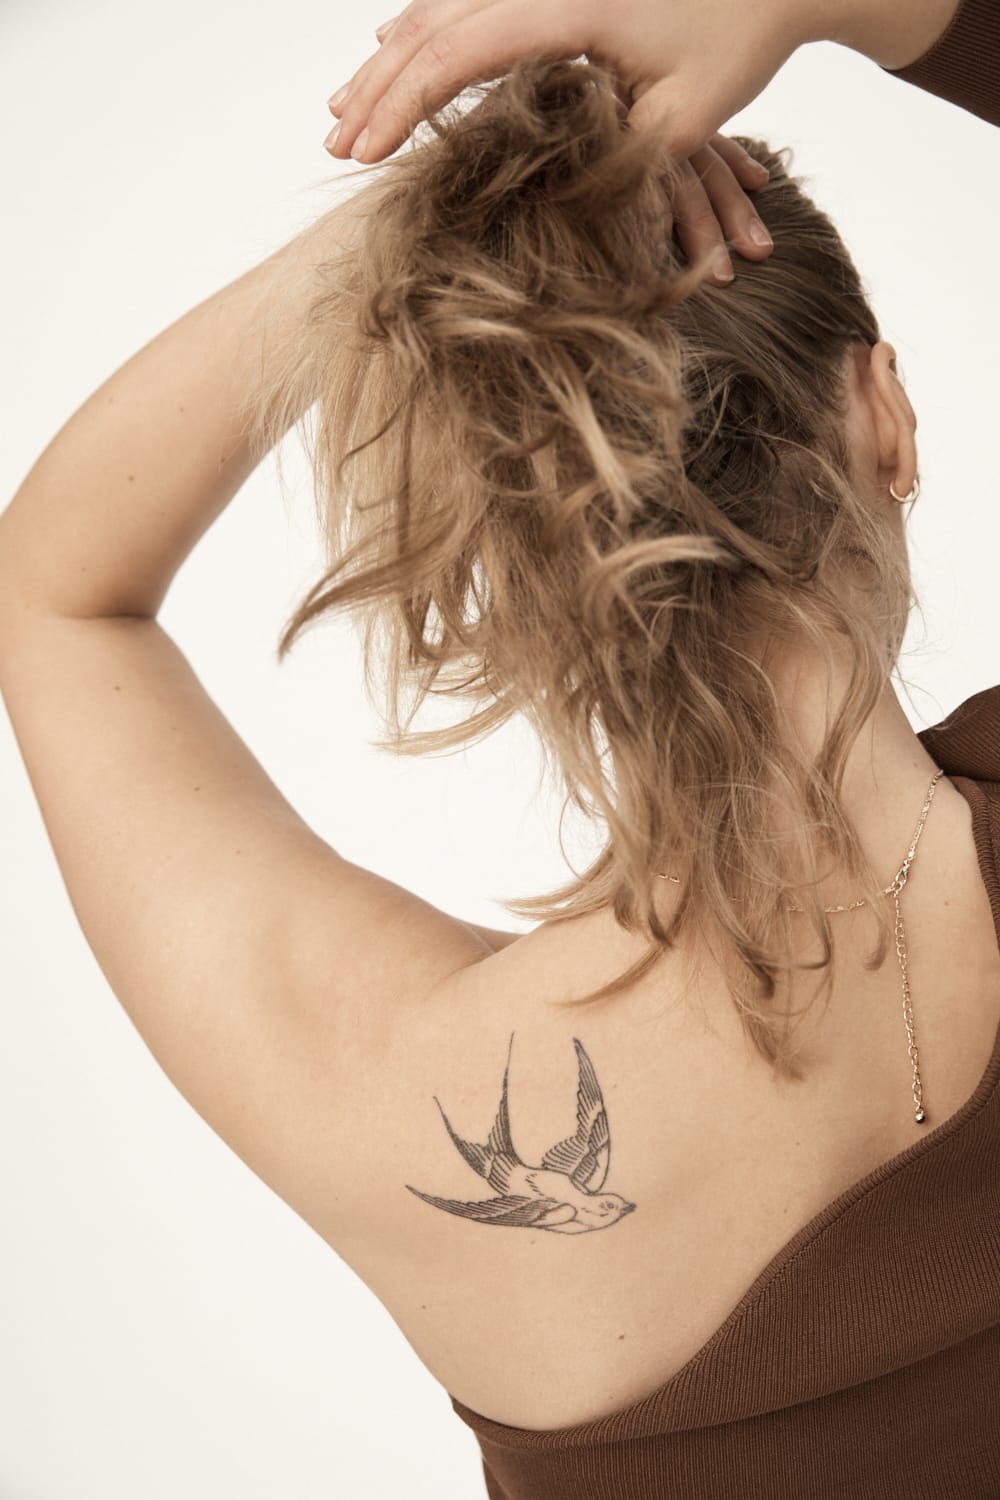 11 Ways to Test Out a Tattoo Before Going Permanent | CafeMom.com